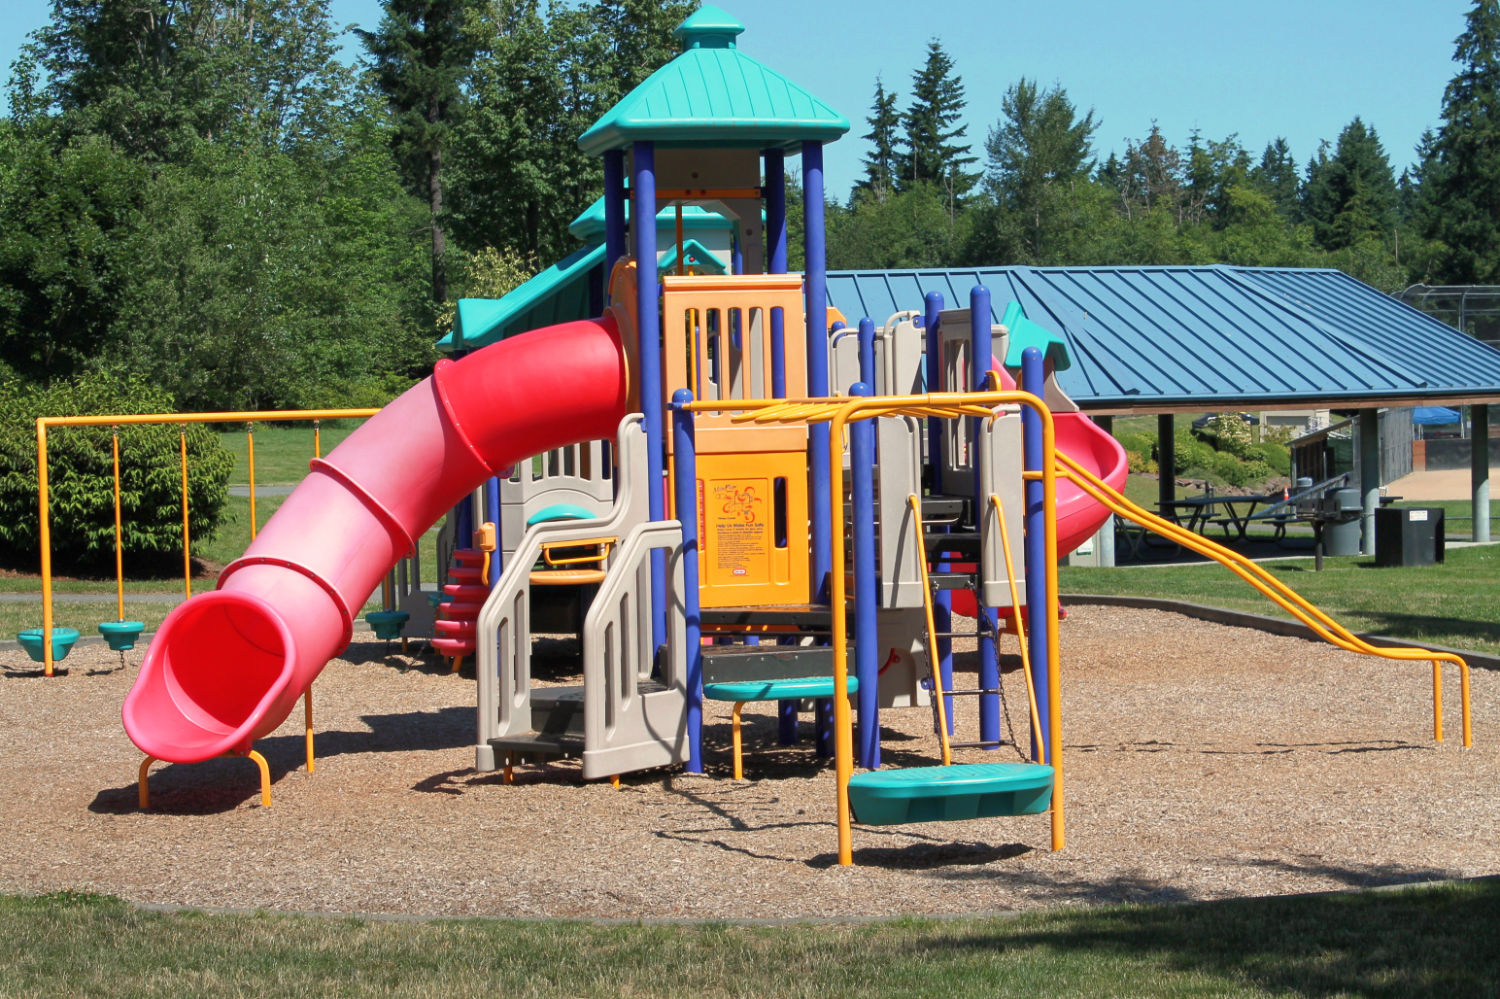 East Sammamish Park playground structure with slides, ladders, climbing apparatuses, and other attachments.